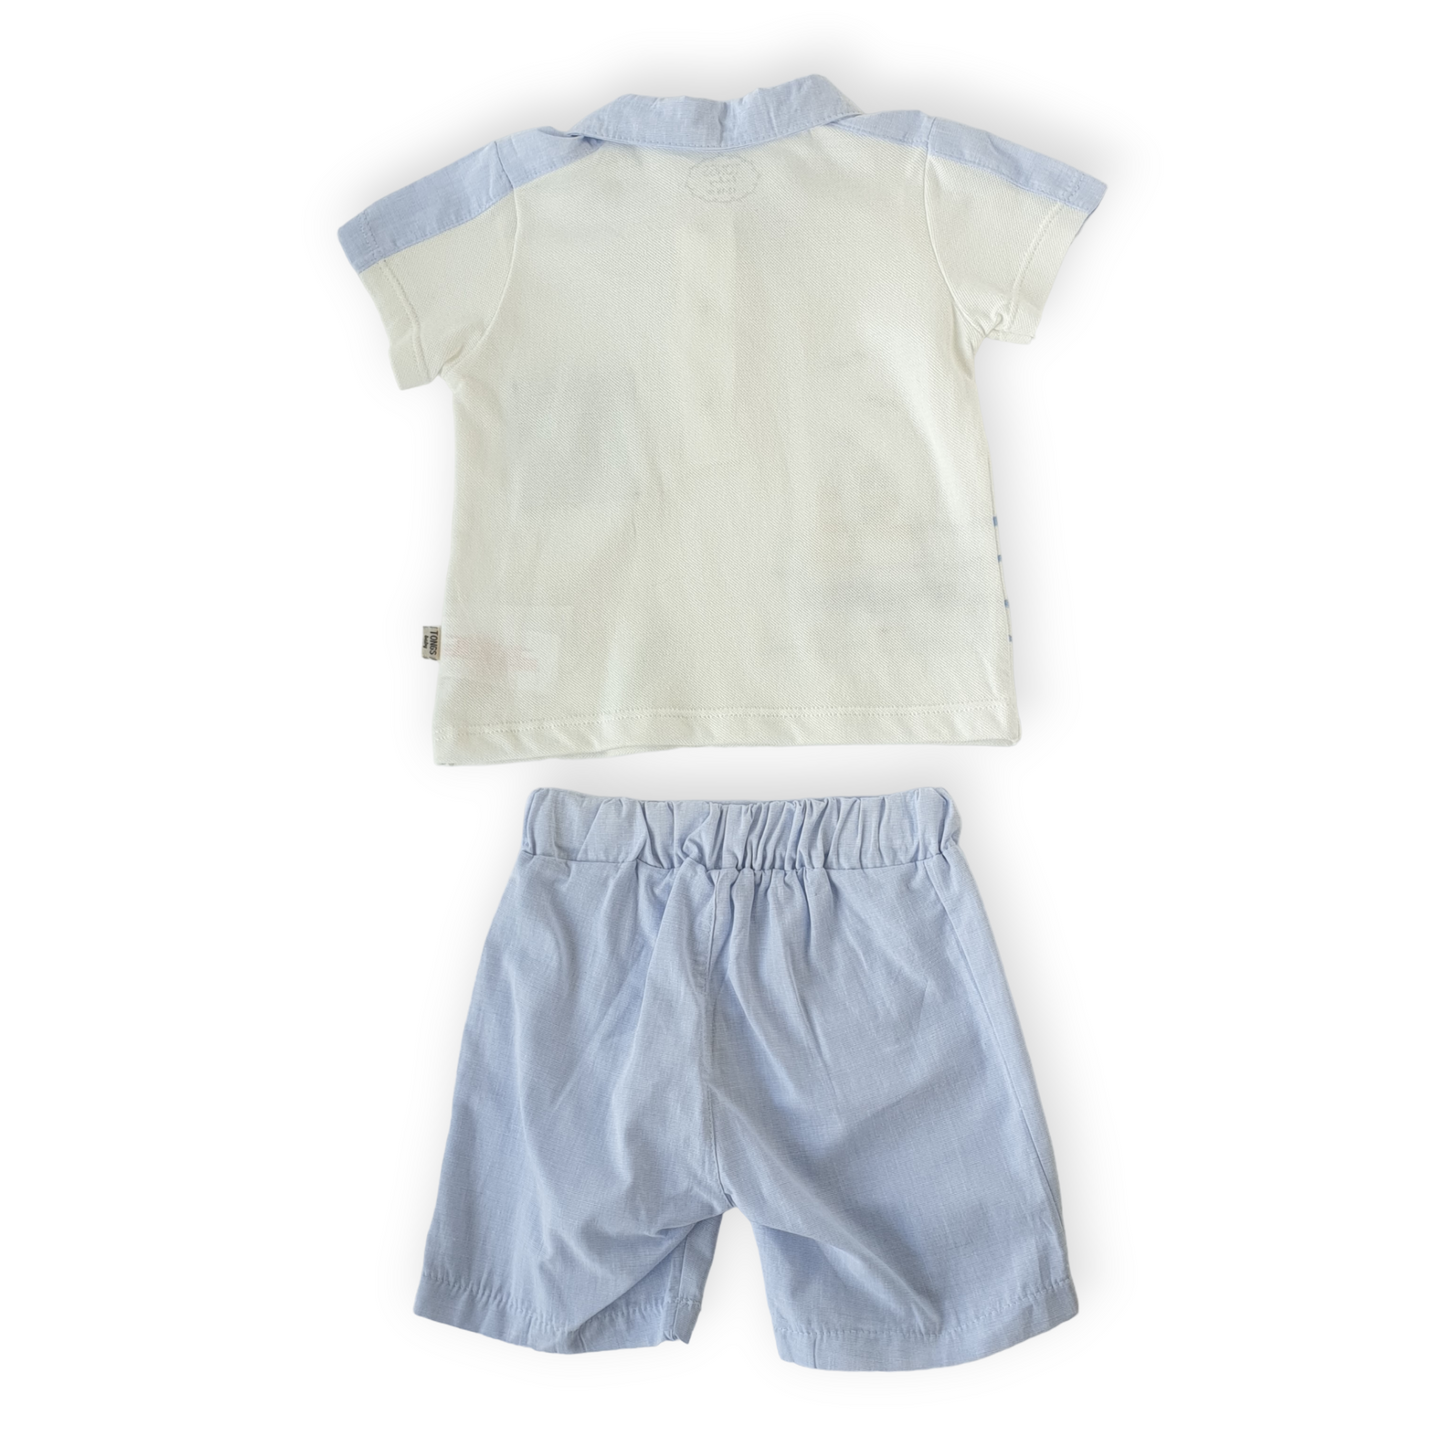 Ship Baby Boy Set White and Blue-Blue, Boy, Catboy, Catset2pcs, Sea, Set, Ship, Short sleeve, Shorts, SS23, Sun, Top, White-Tongs-[Too Twee]-[Tootwee]-[baby]-[newborn]-[clothes]-[essentials]-[toys]-[Lebanon]